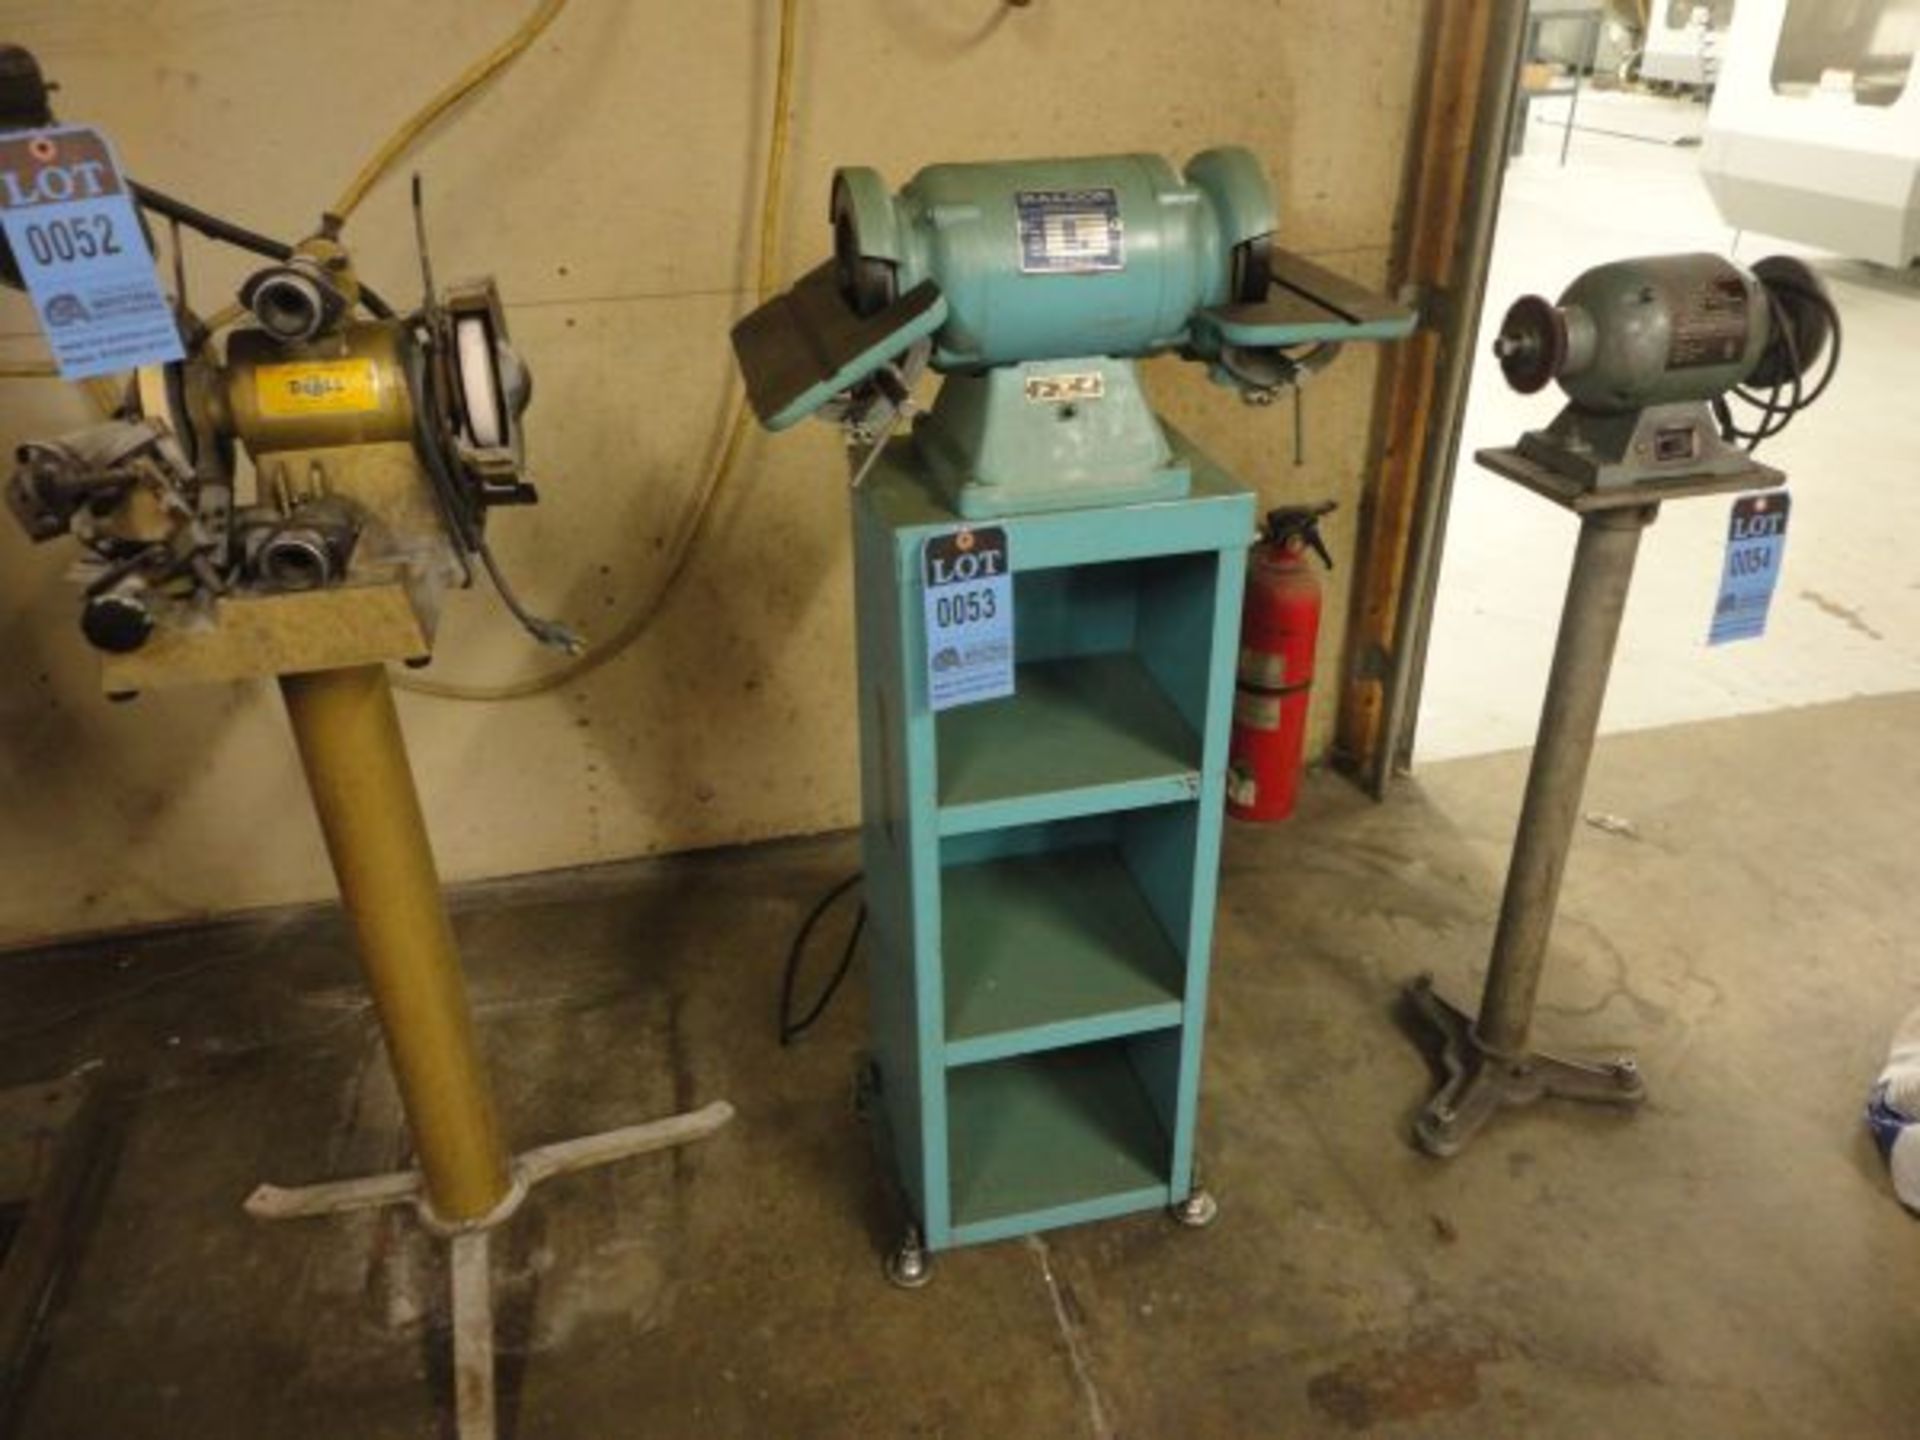 6" DIAMETER BALDOR DOUBLE-END GRINDER/BUFFER WITH STAND